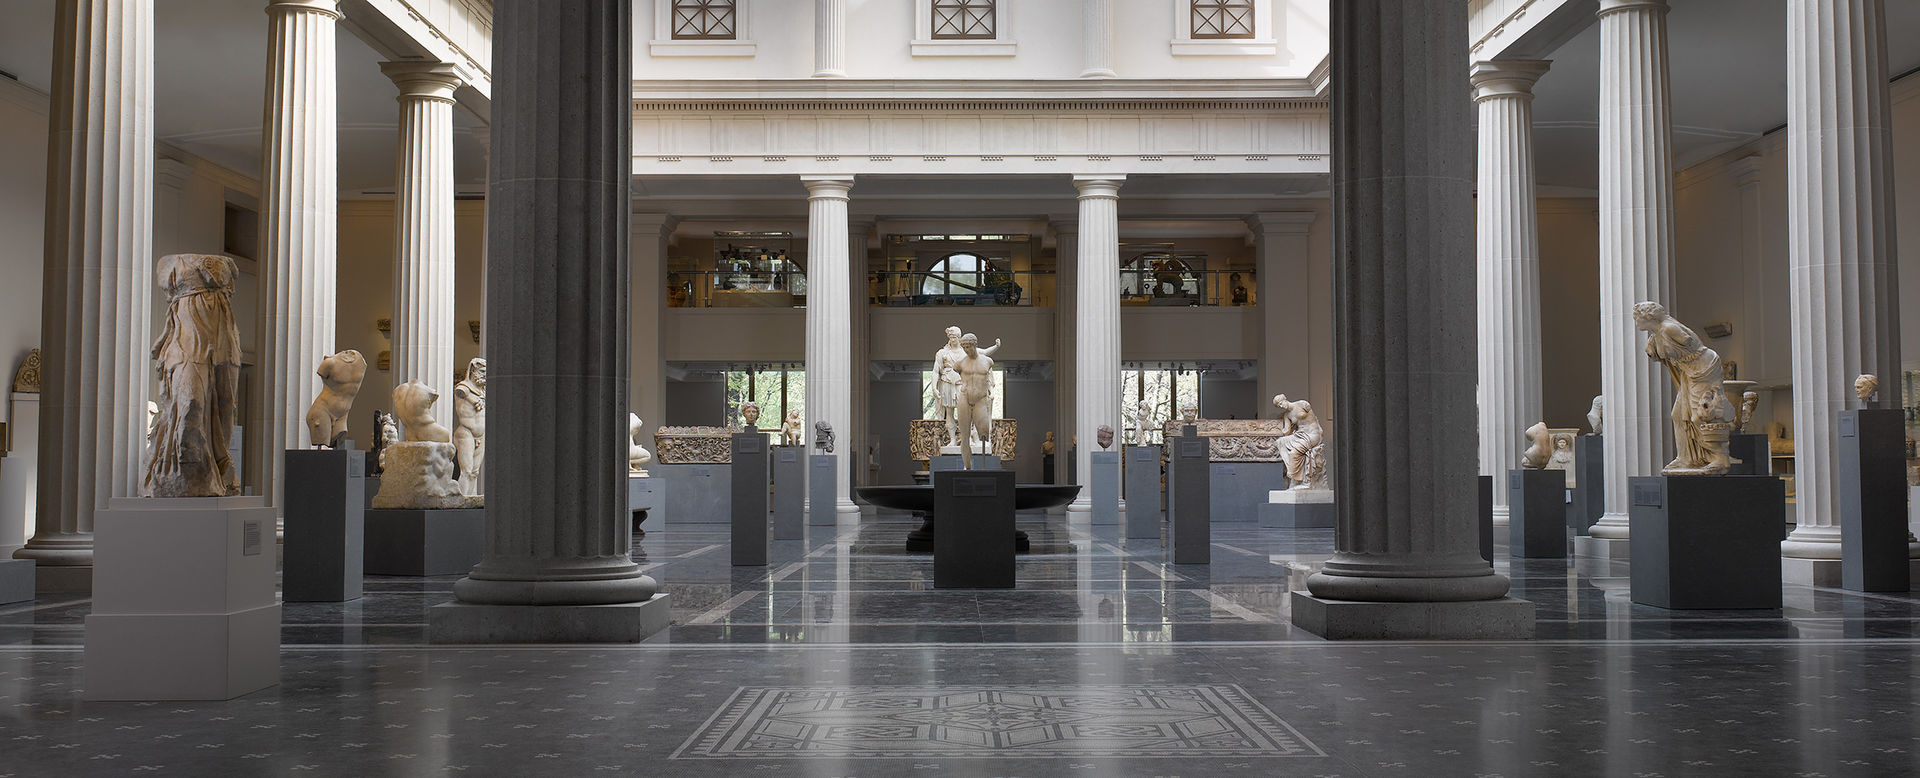 A very large gallery enclosed by a colonnade and filled with with stone sculptures from ancient Rome lit by natural sunlight.